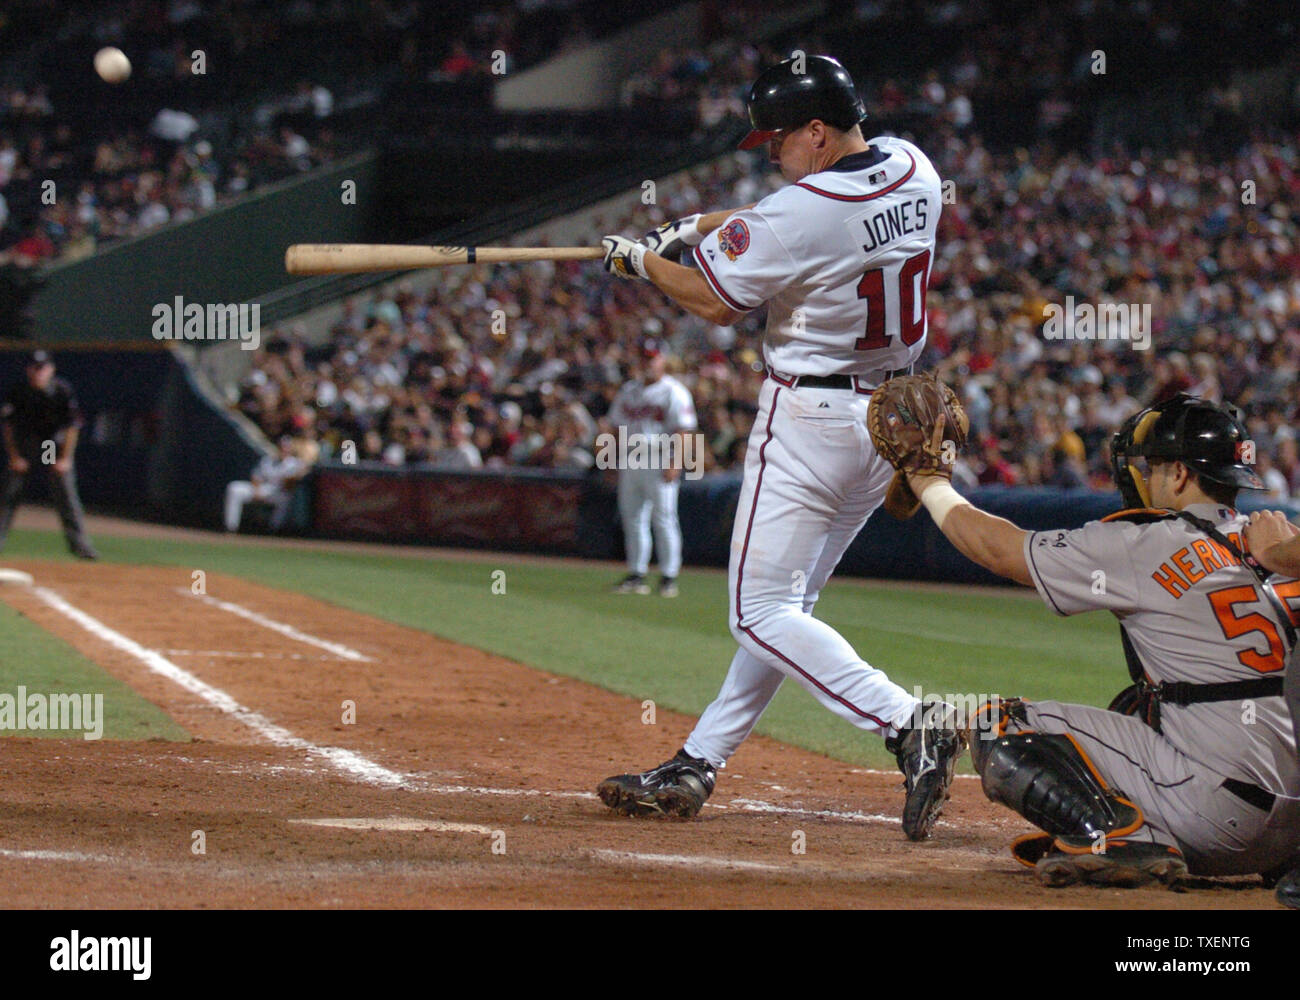 Atlanta Braves Chipper Jones lofts a solo home run in the ninth inning of  play against the Baltimore Orioles July 1, 2006, in Atlanta's Turner Field.  The Orioles defeated the Braves 7-4. (